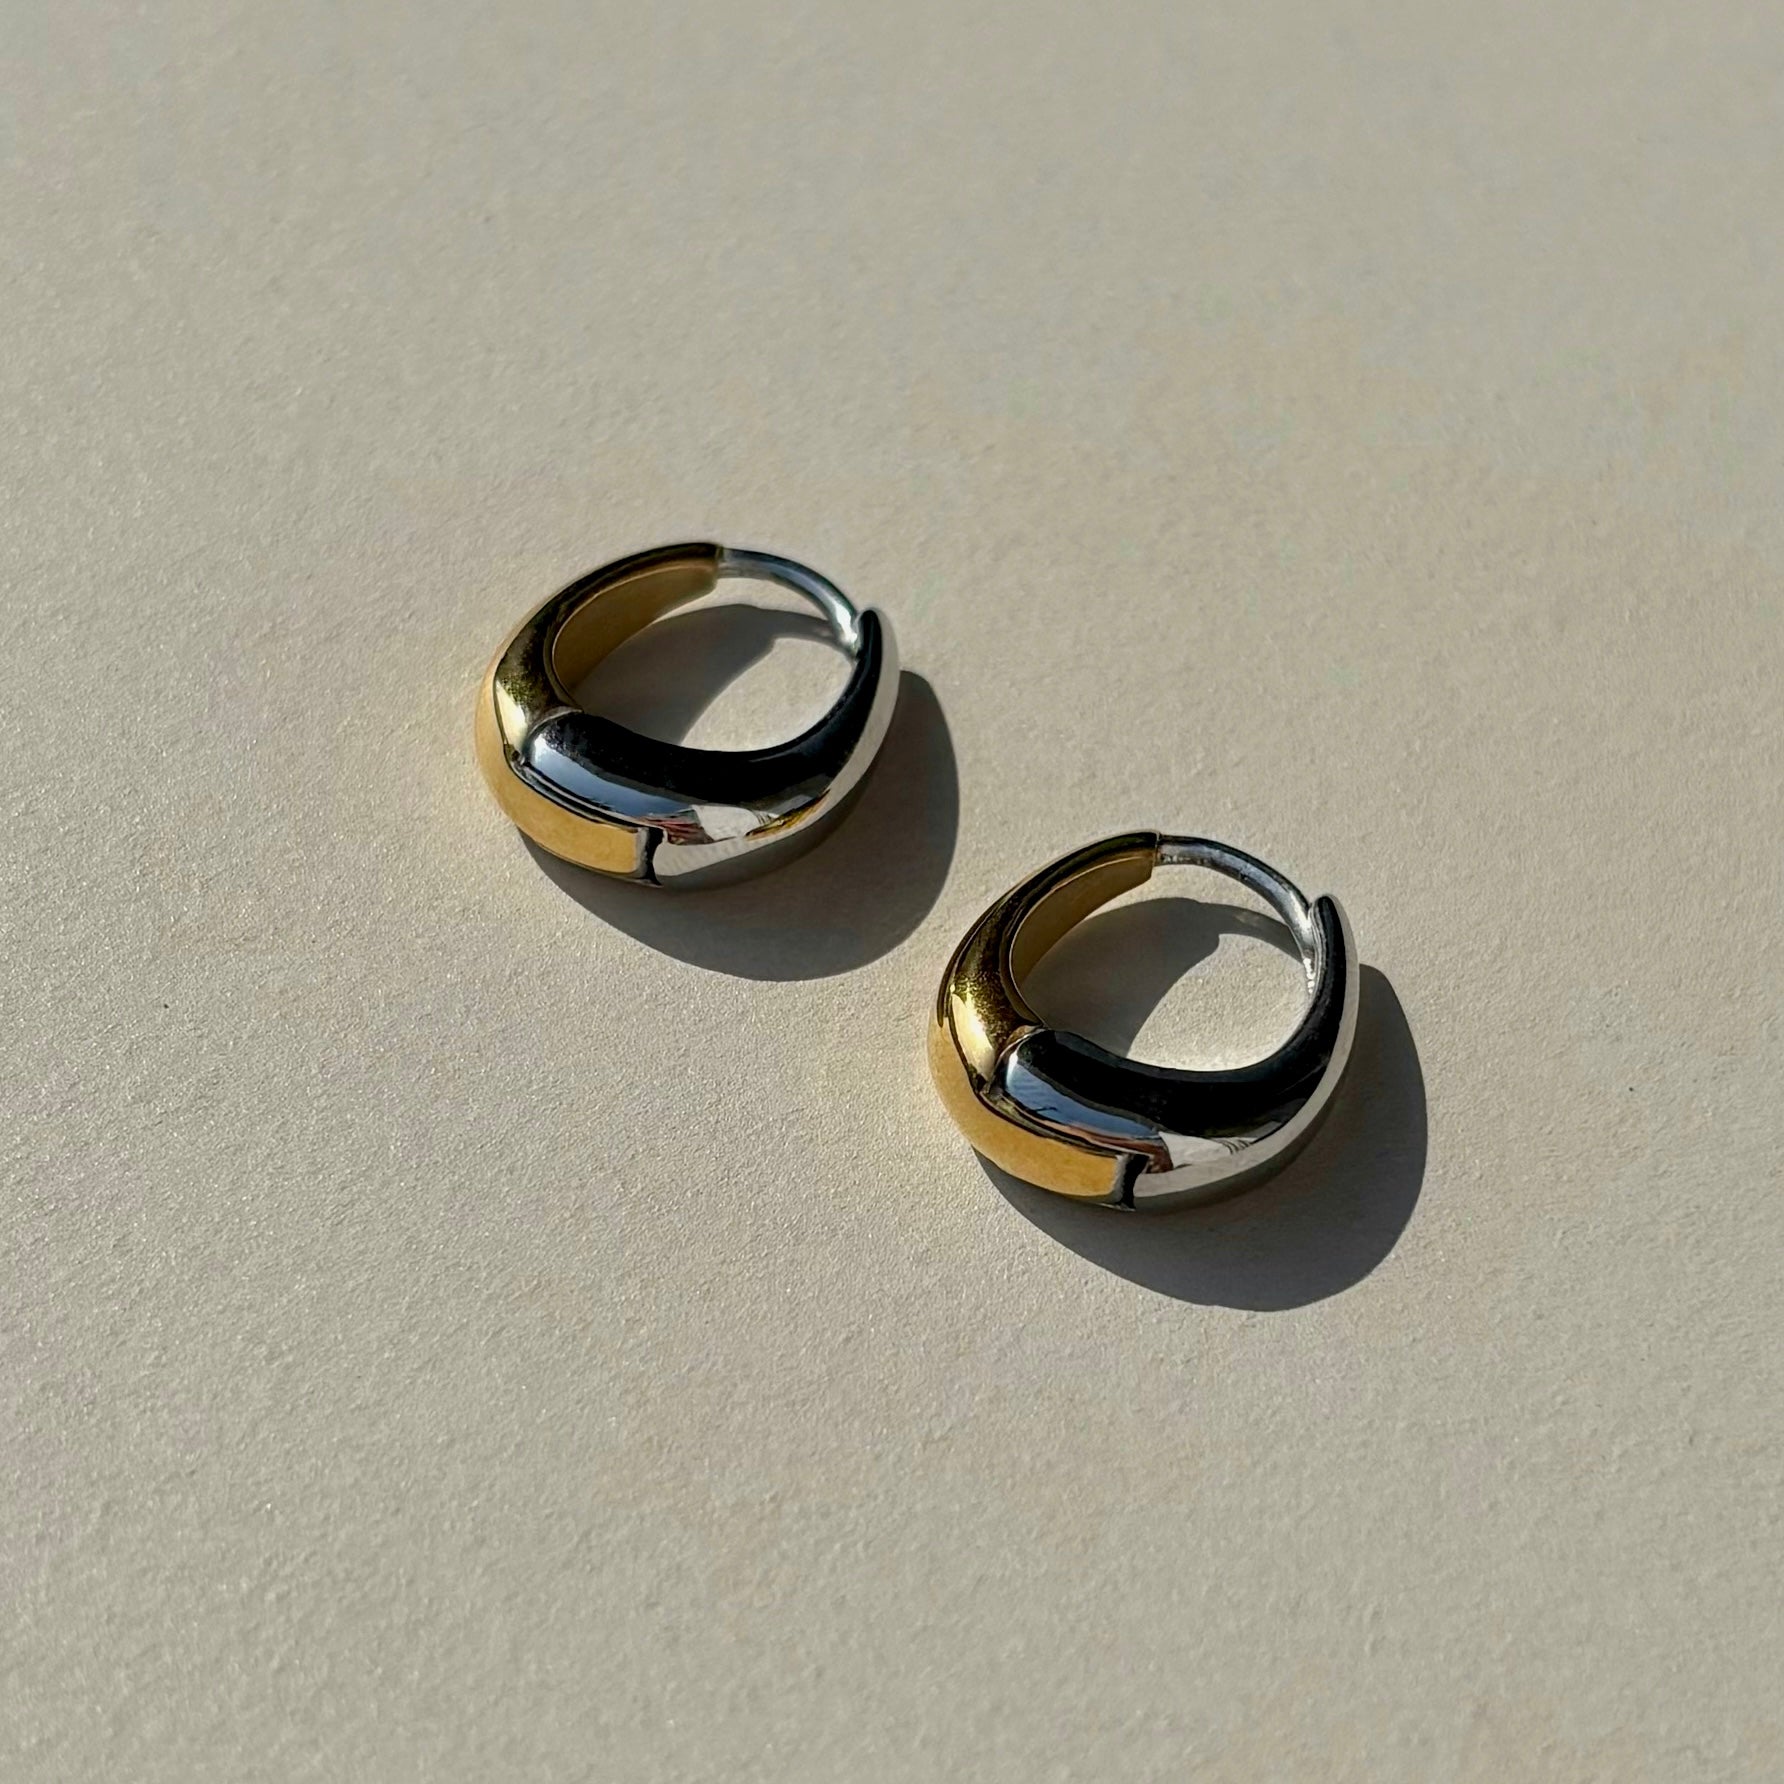 Introducing the Nine hoops from our SS24 collection: versatile mixed-metal earrings. Available in three shapes blending gold and silver.